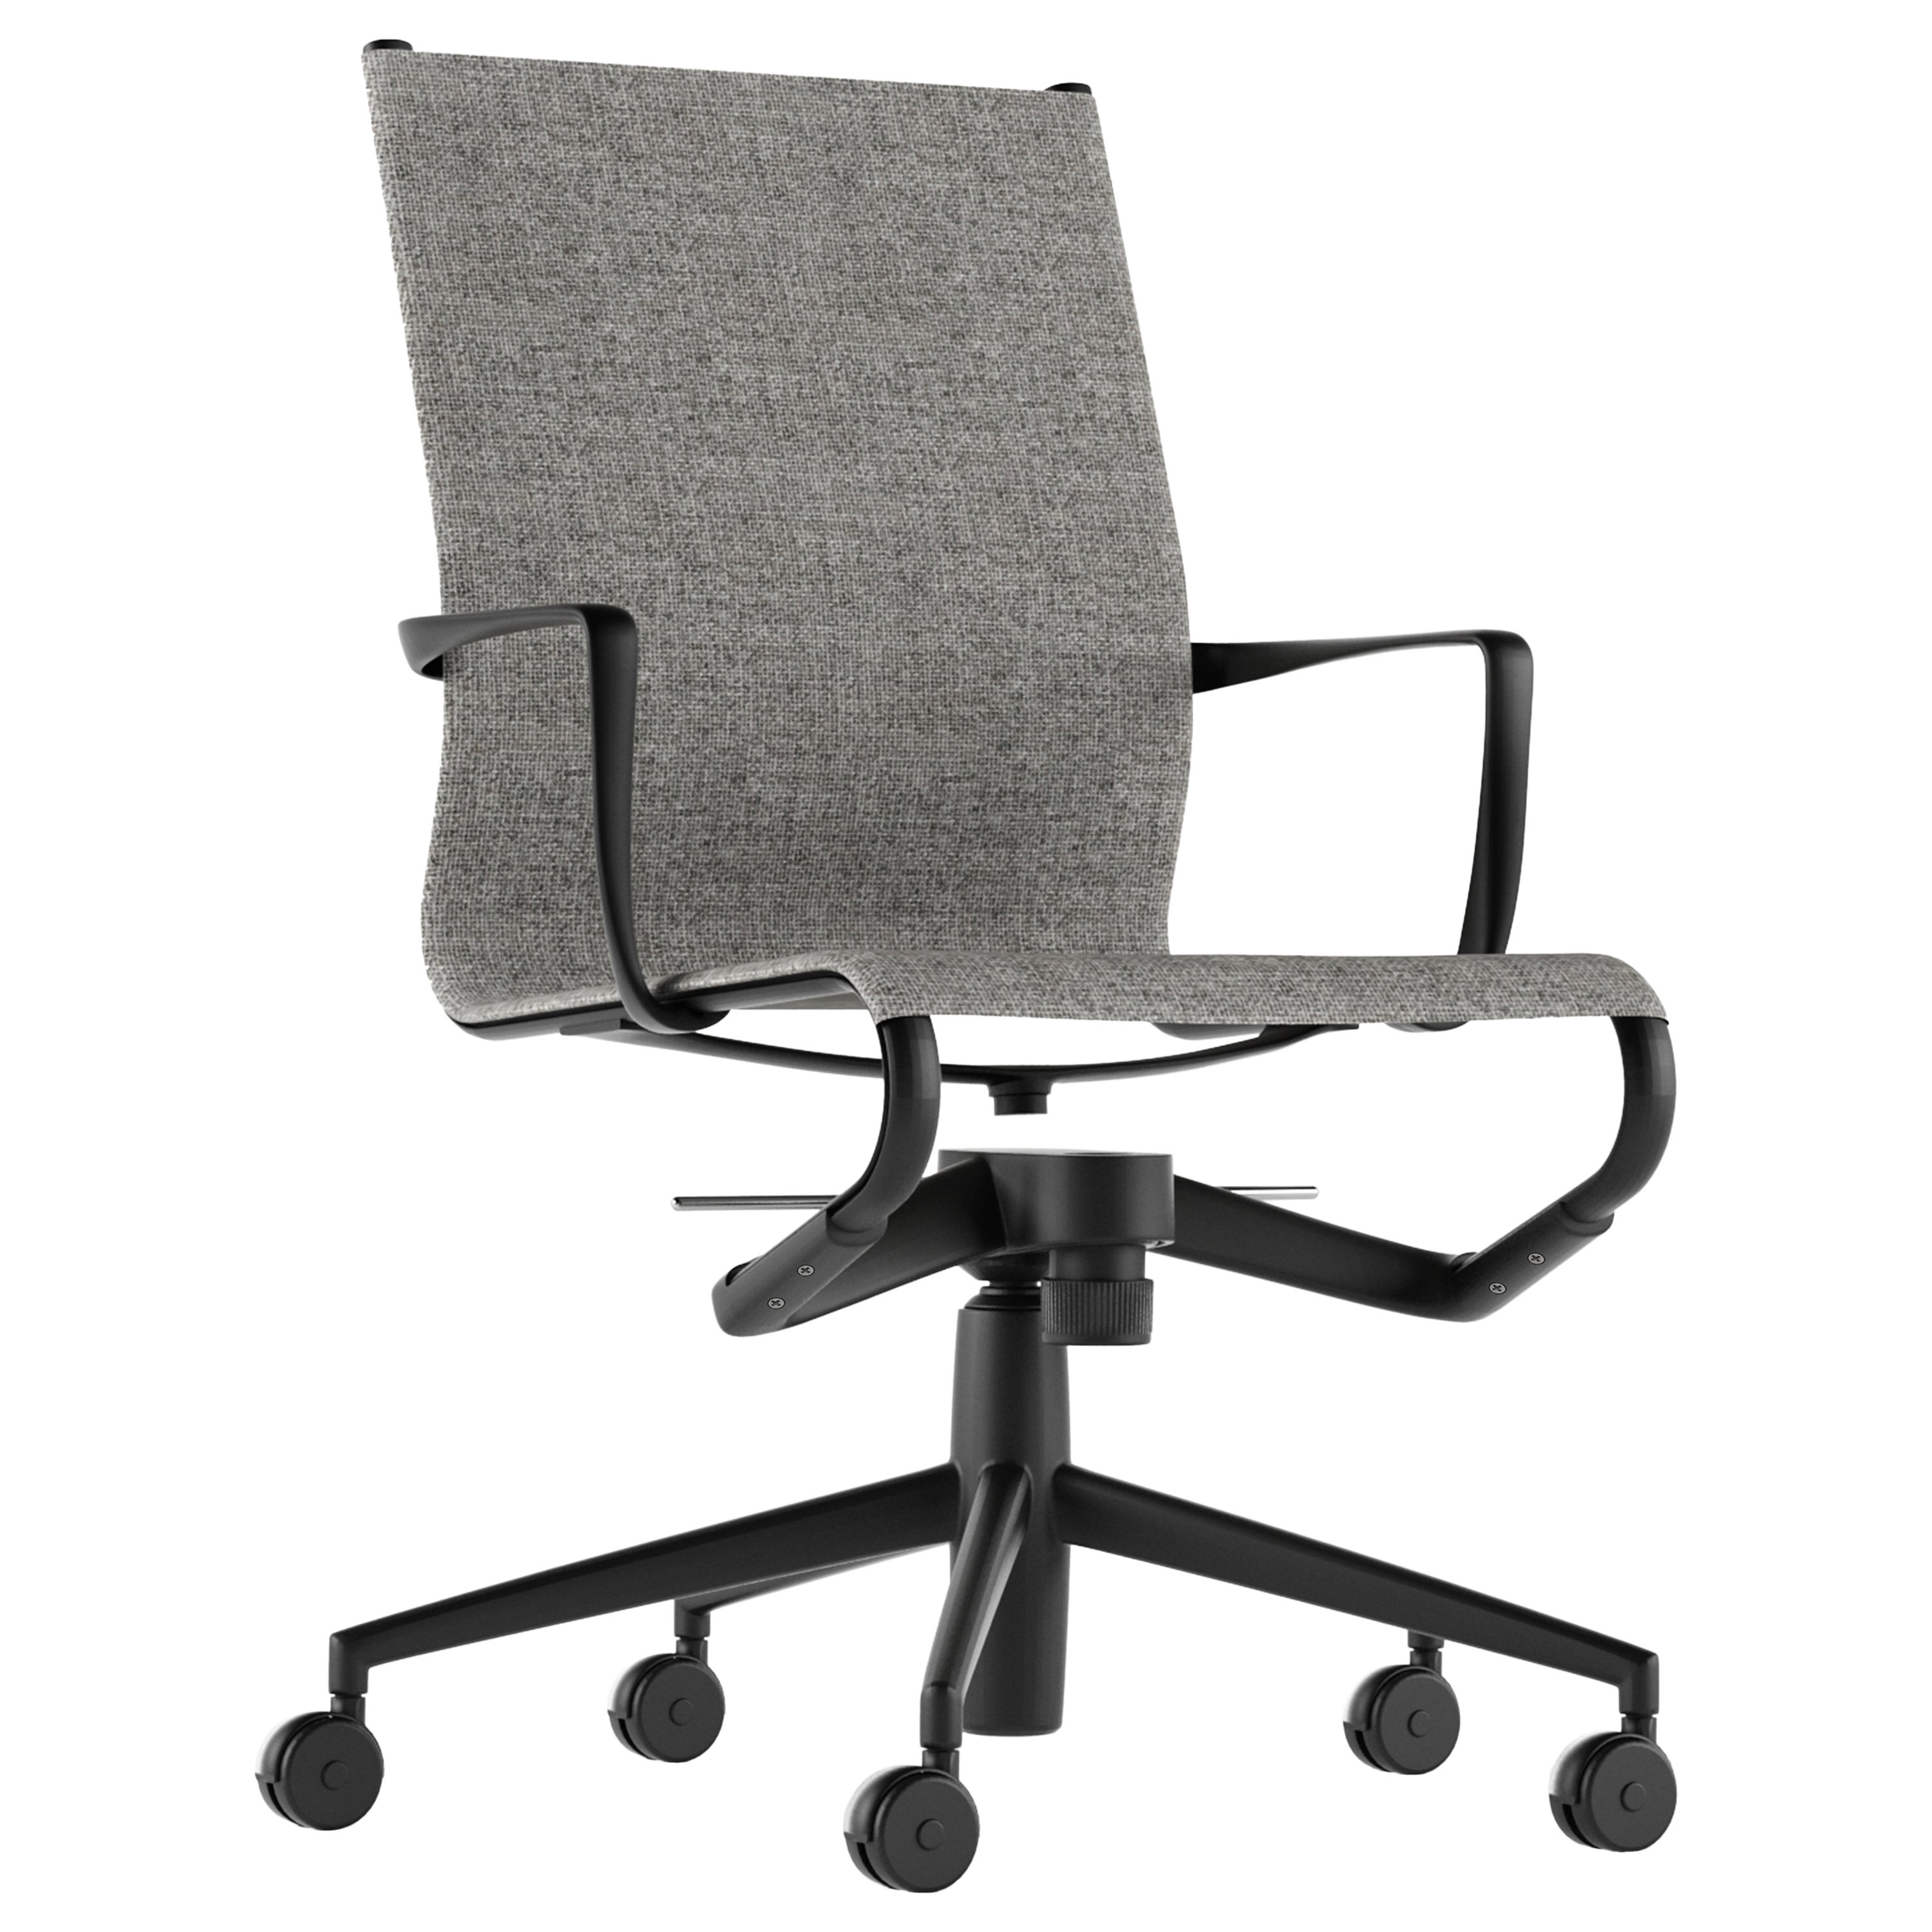 Alias 445 Rollingframe+ Tilt 47 Chair in Grey Seat & Lacquered Aluminium Frame For Sale